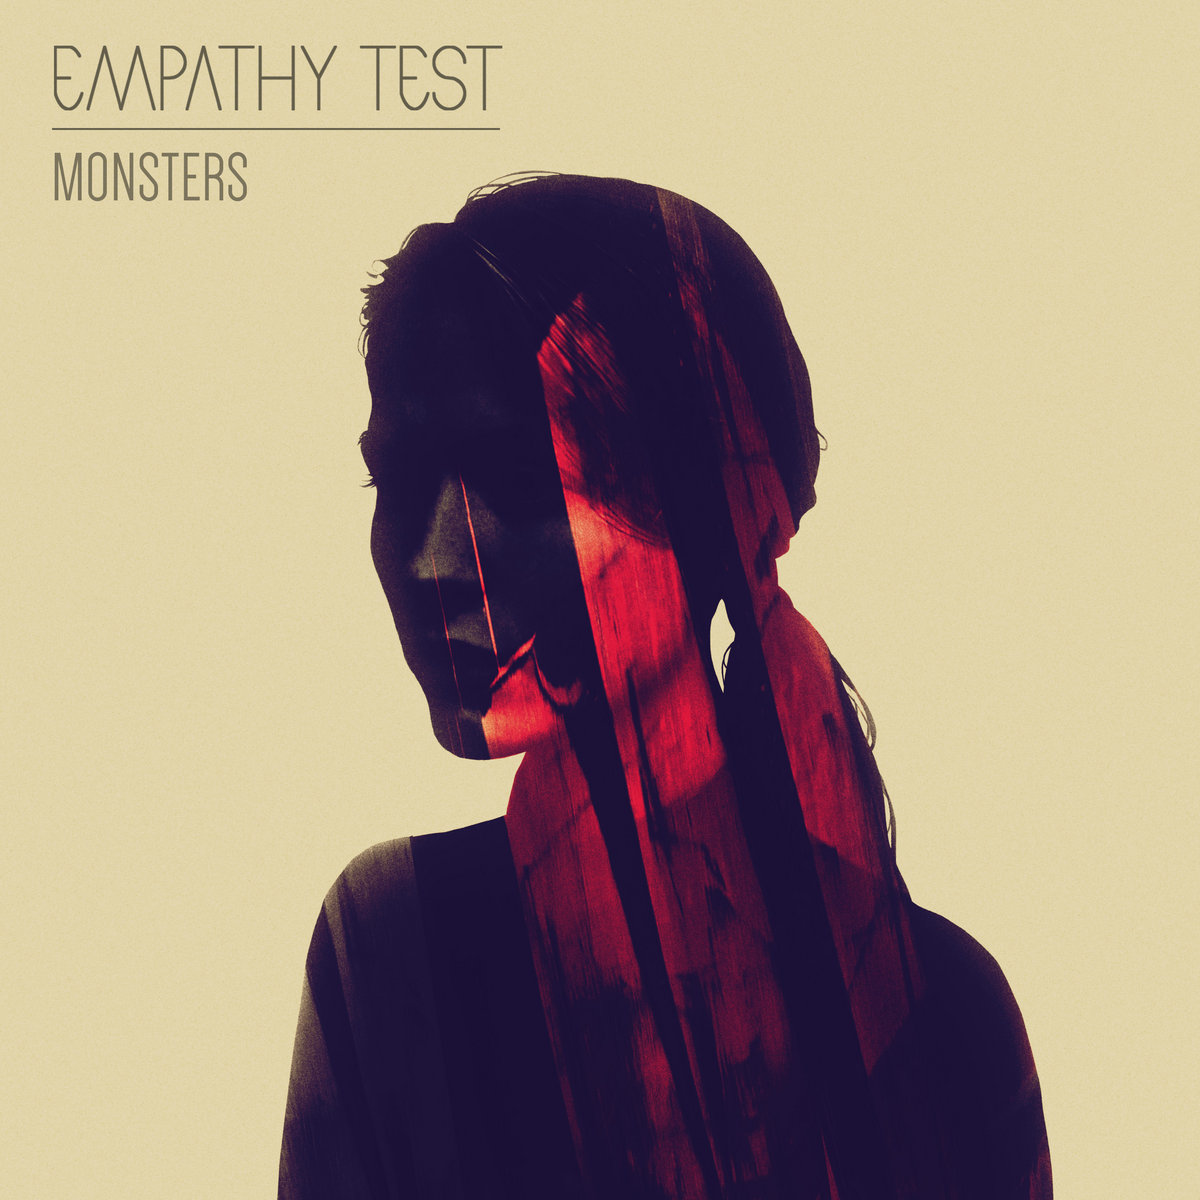 15. Monsters - Empathy Test.It was so nice to finally get a new album from this criminally underrated band this year & the wait was totally worth it. Best tracks:Fear Of DisappearingIncubation SongHoly RiversStop @empathytest